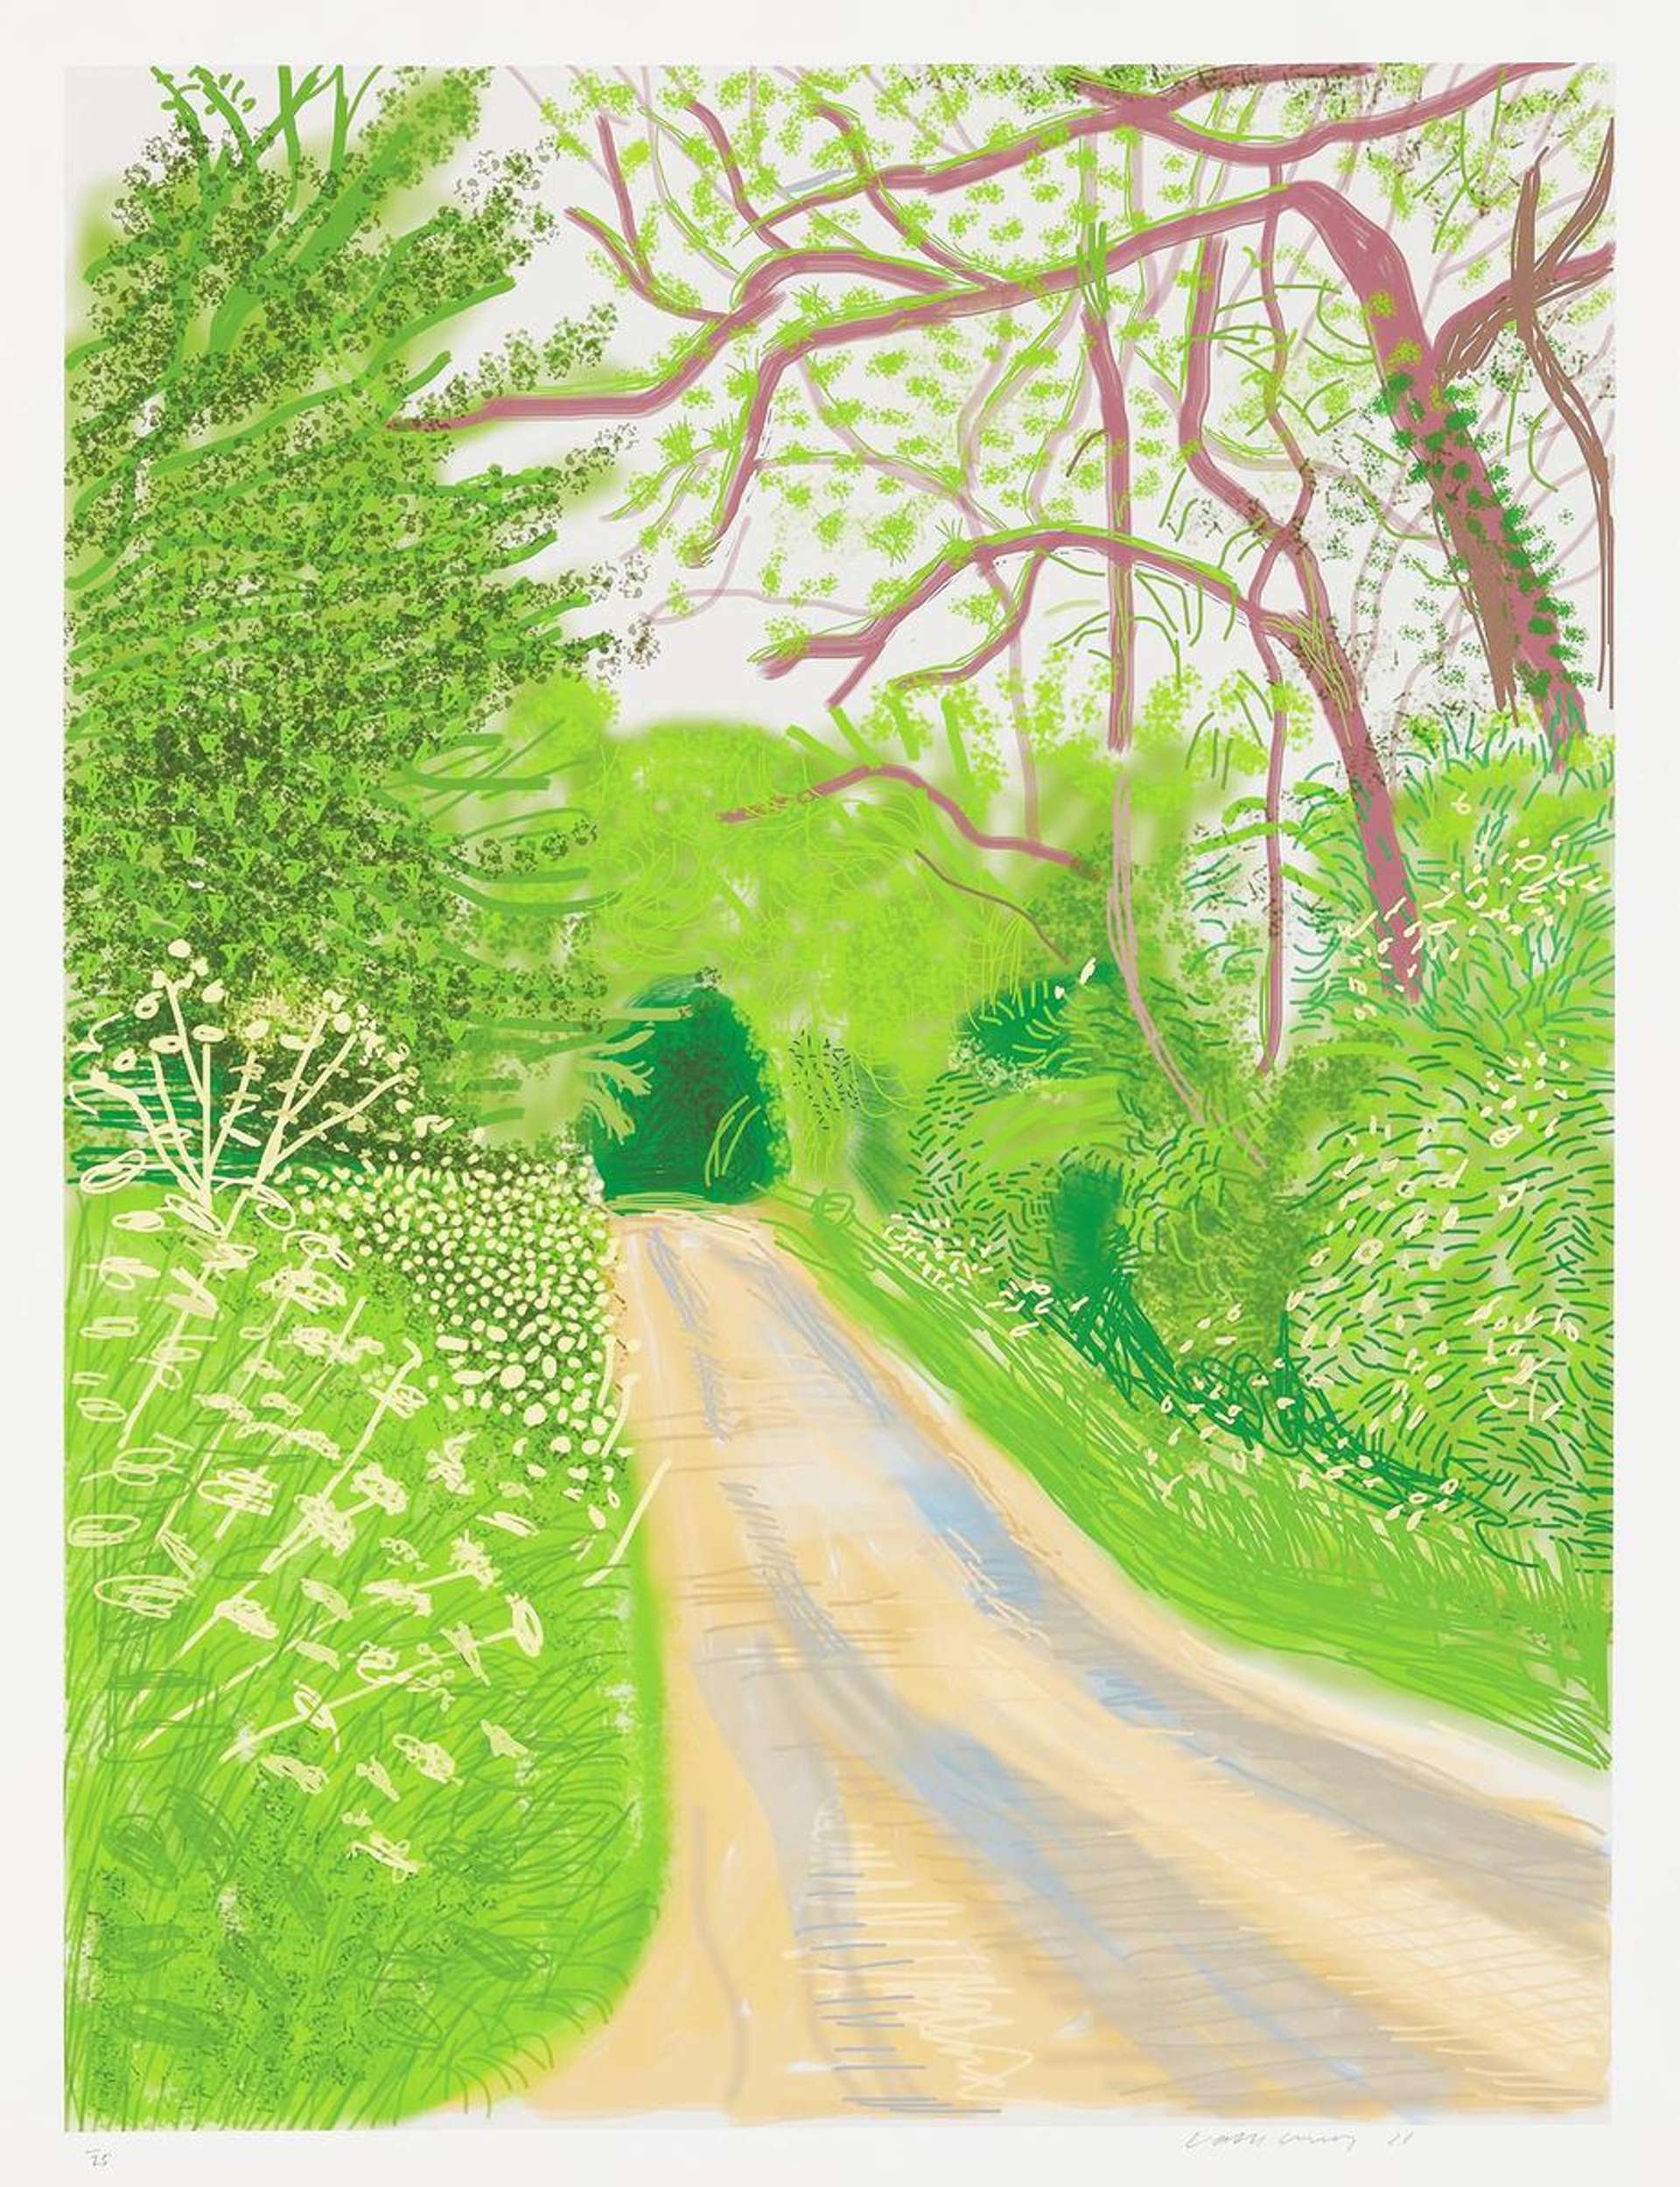 The Arrival Of Spring In Woldgate East Yorkshire 16th May 2011 - Signed Print by David Hockney 2011 - MyArtBroker